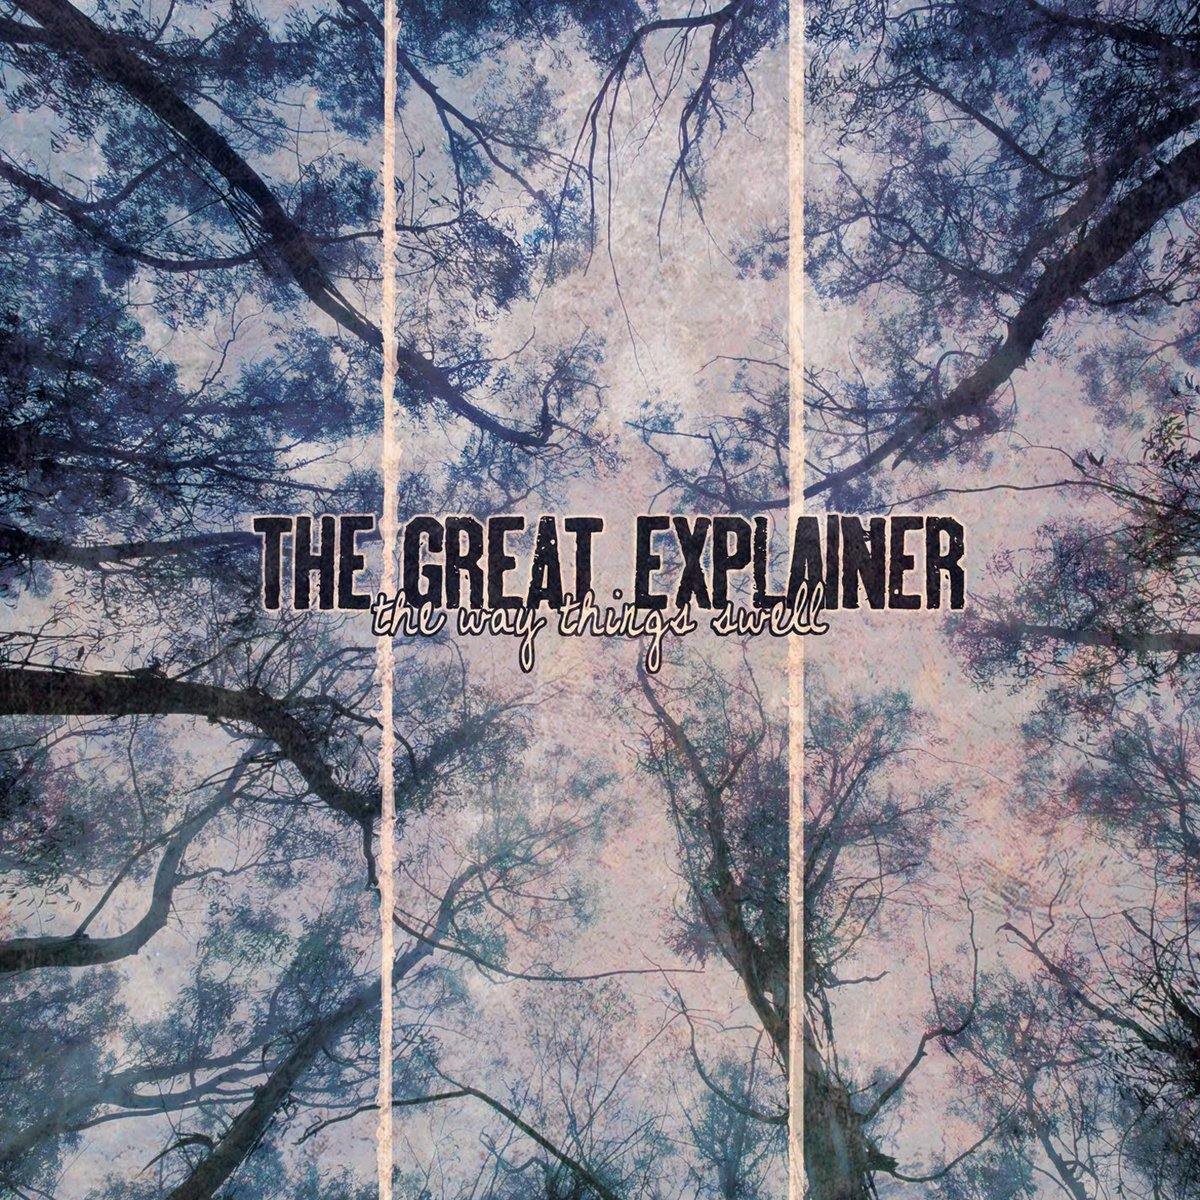 Buy – The Great Explainer "The Way Things Swell" 10" – Band & Music Merch – Cold Cuts Merch